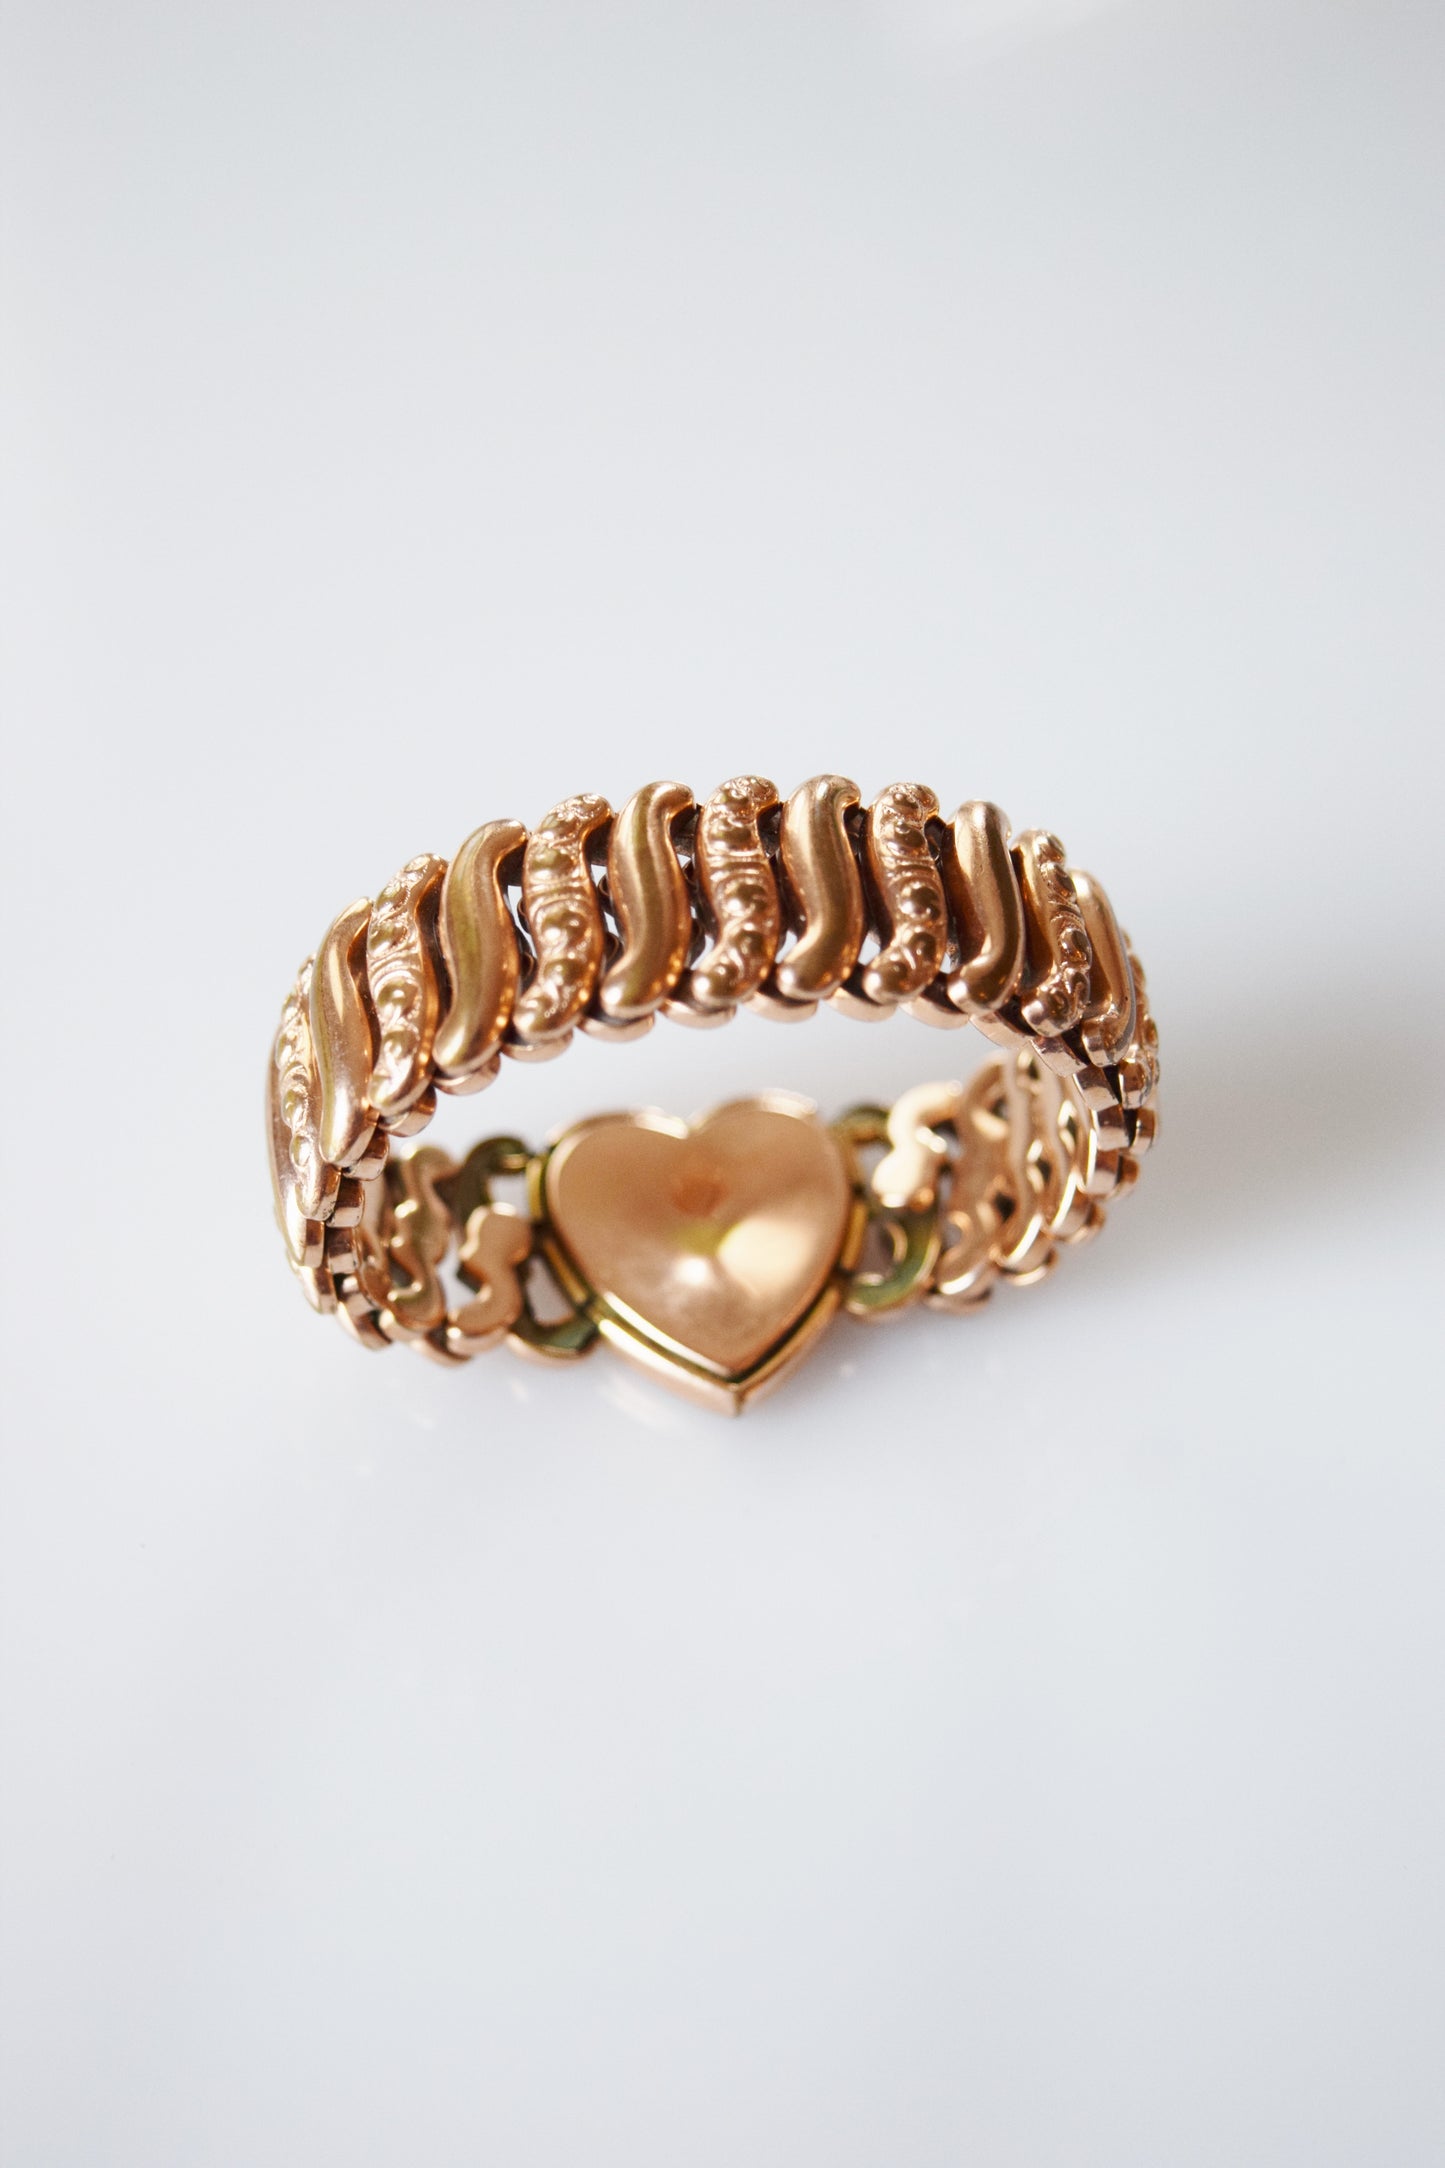 Antique Sweetheart Expansion Bracelet with Engraved Heart Charm | "B"